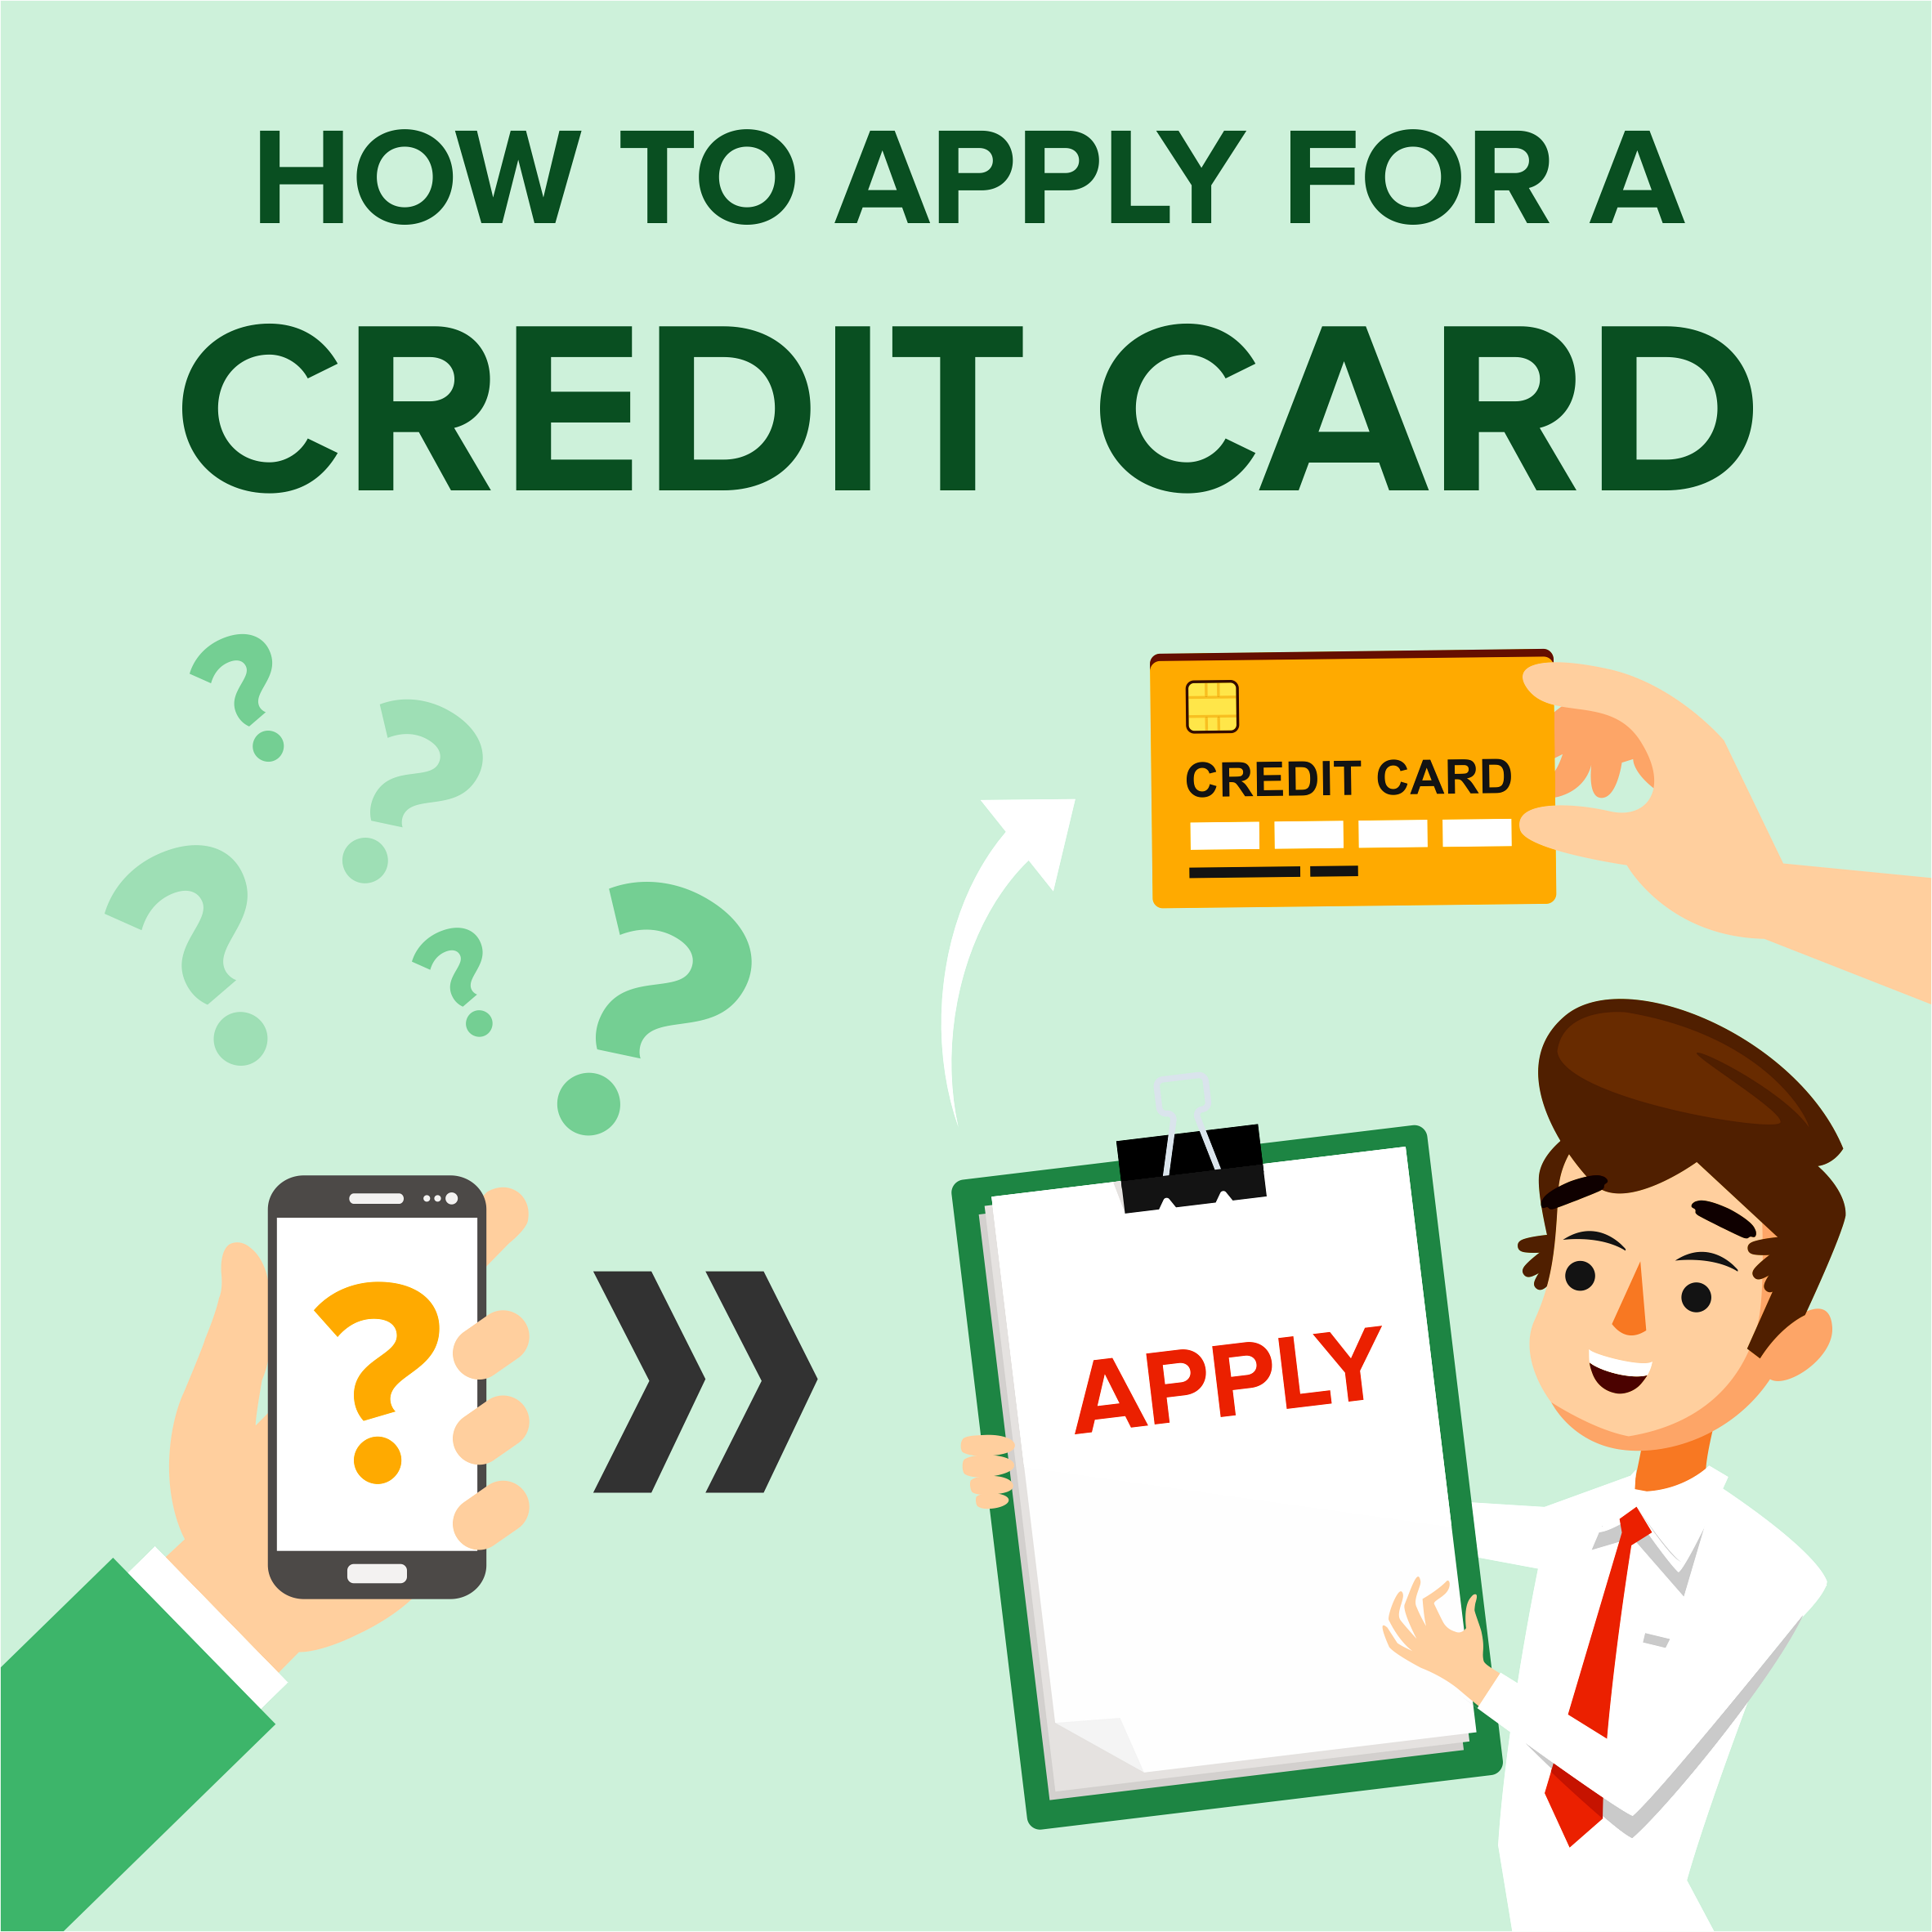 How to Apply For a Credit Card